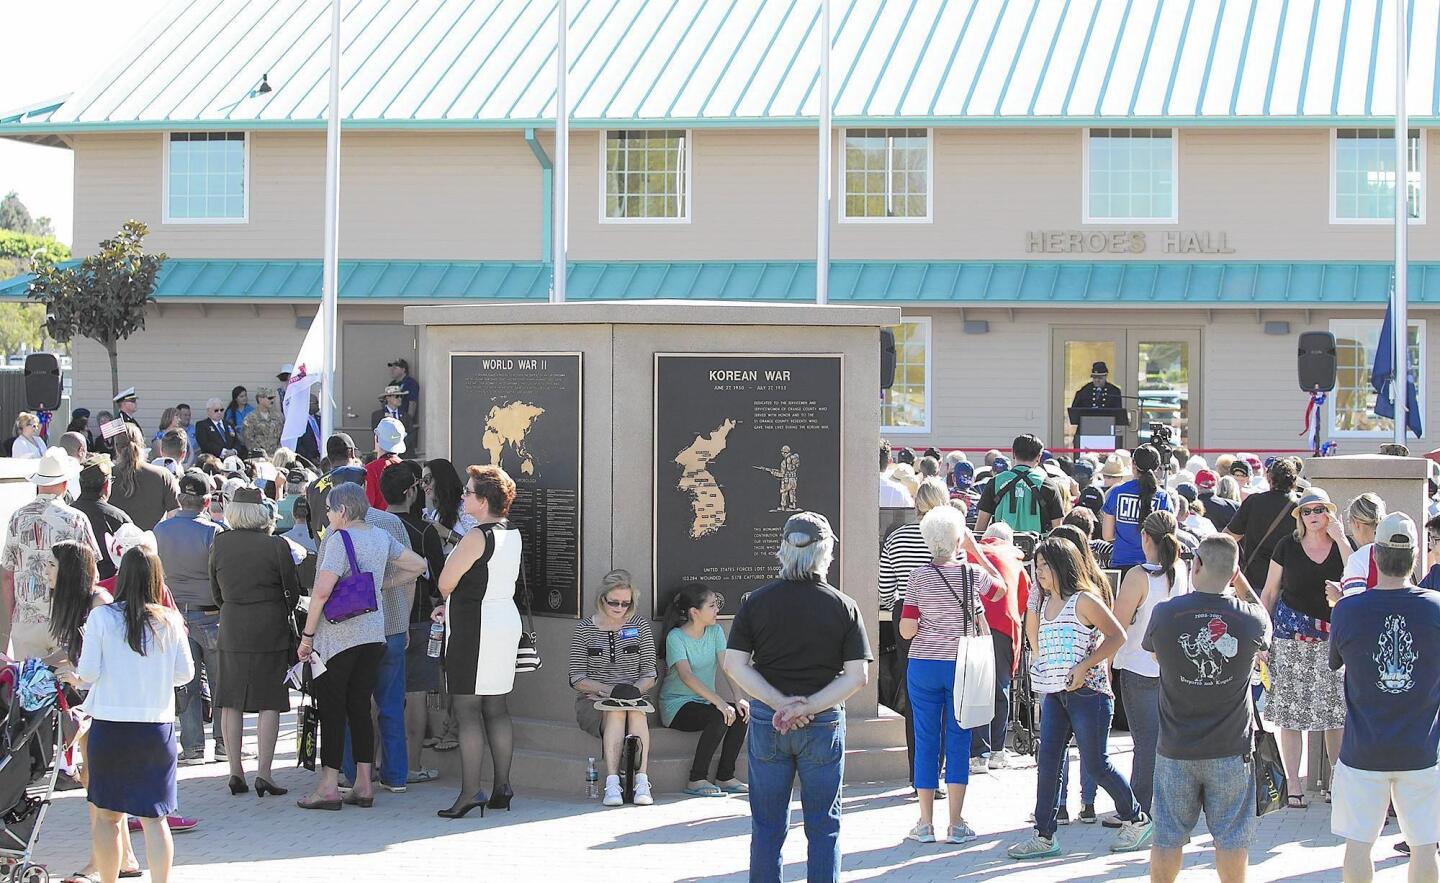 Veterans and other guests gather for Friday’s public dedication of the new Heroes Hall veterans museum at the OC Fair & Event Center in Costa Mesa.